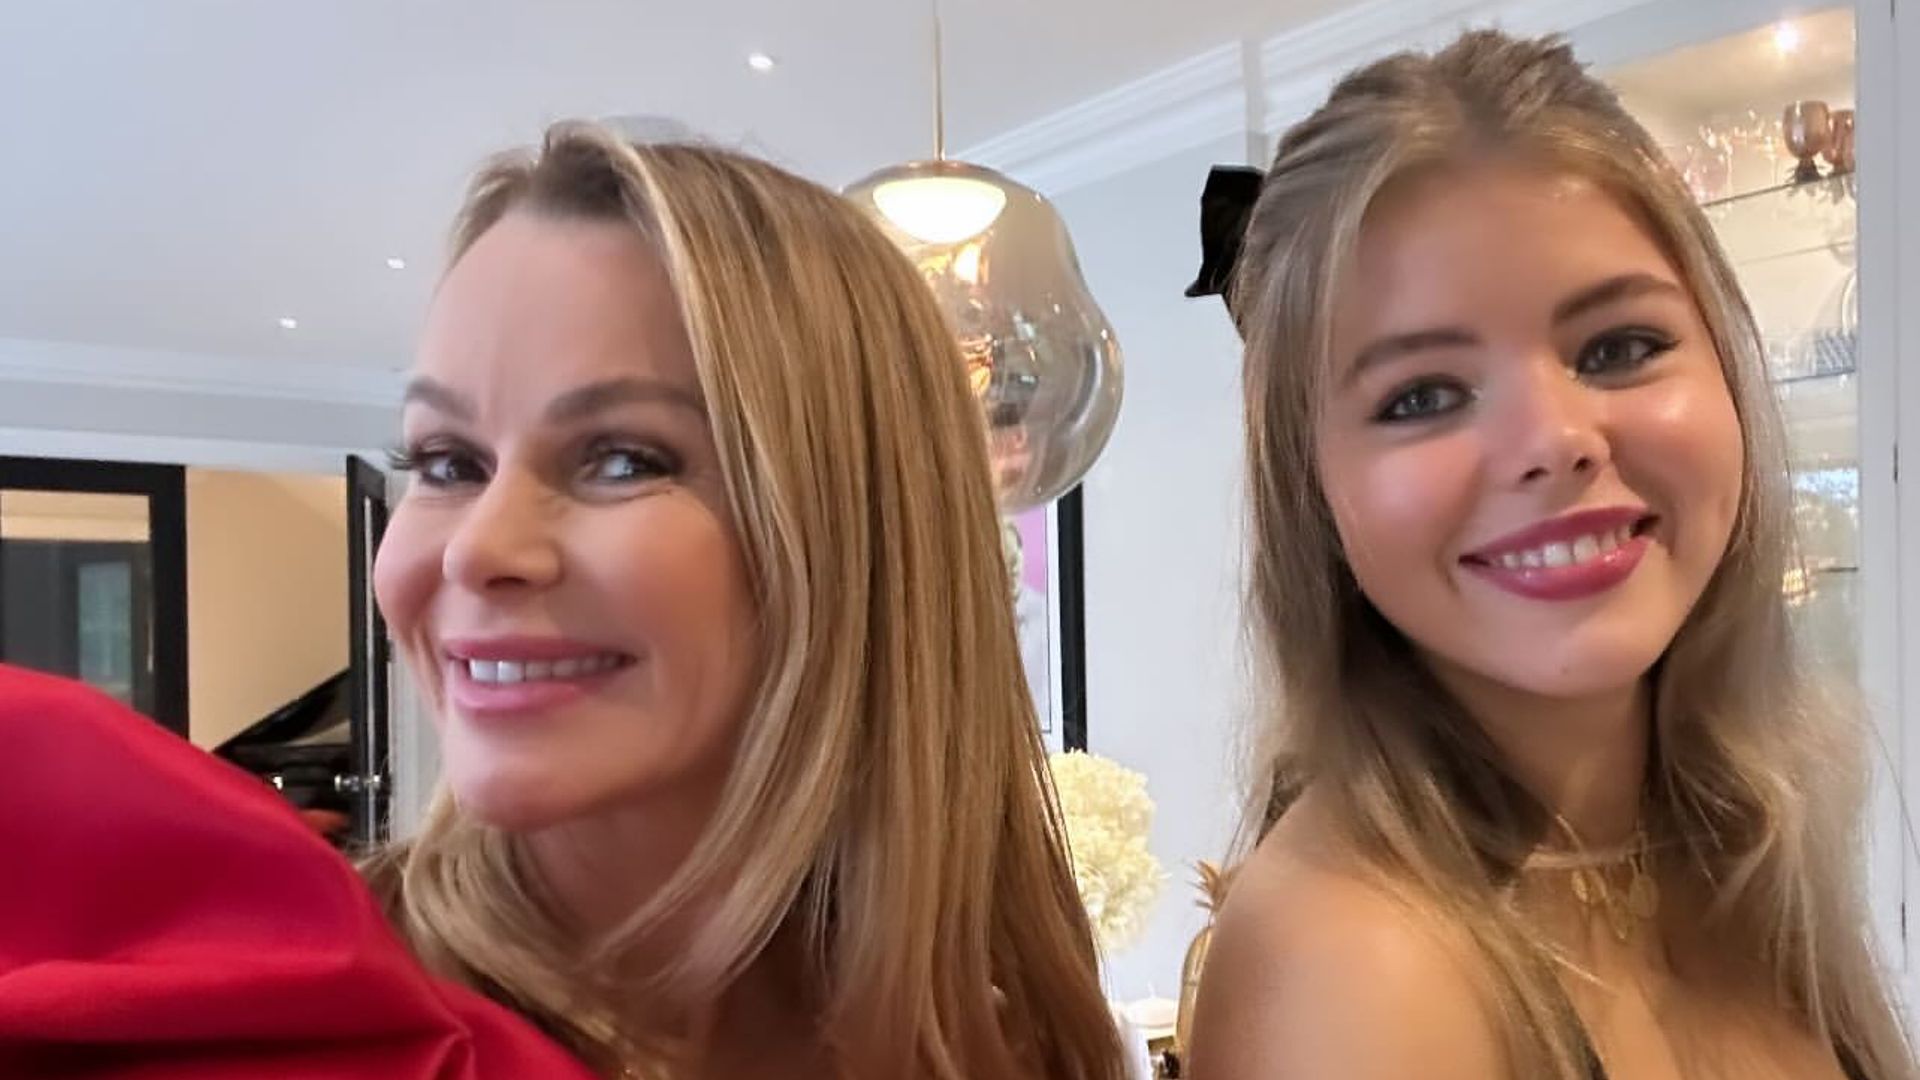 The star looked stunning in a red dress alongside her daughter Lexi